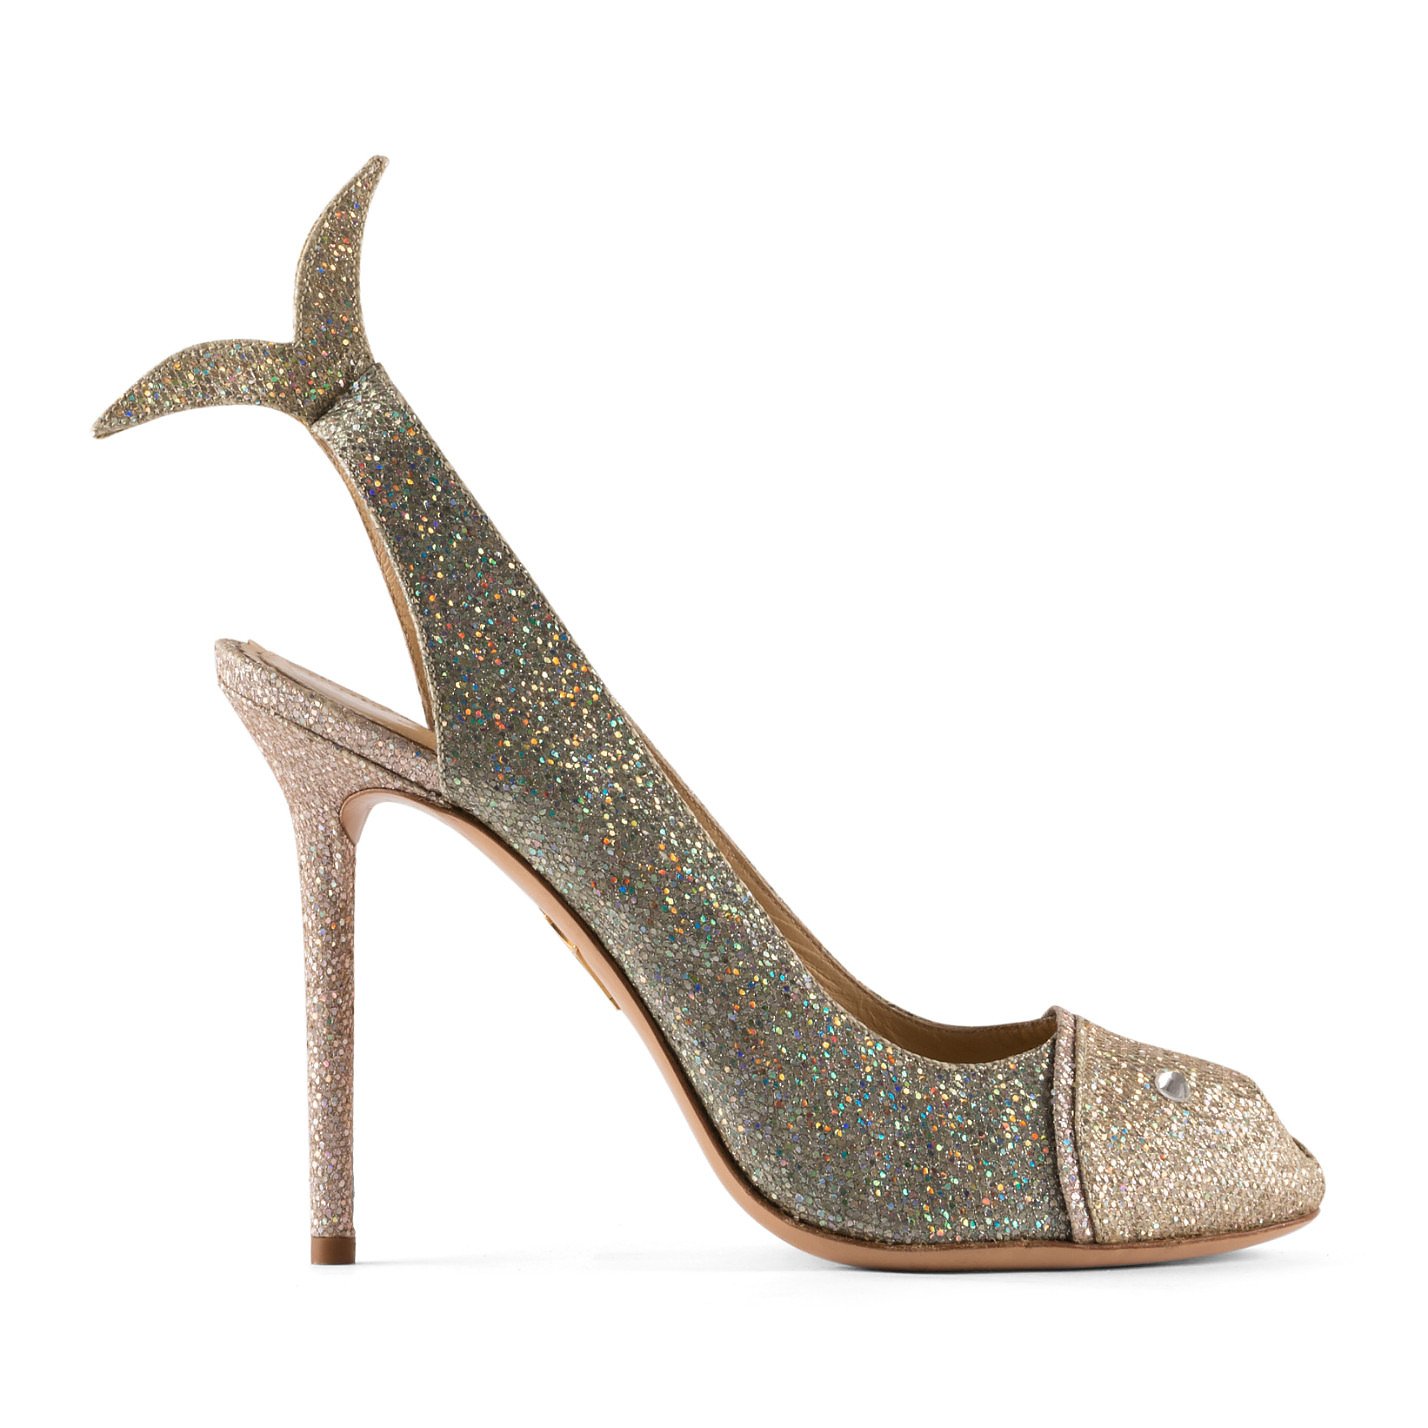 Charlotte Olympia Finley Fish Pumps